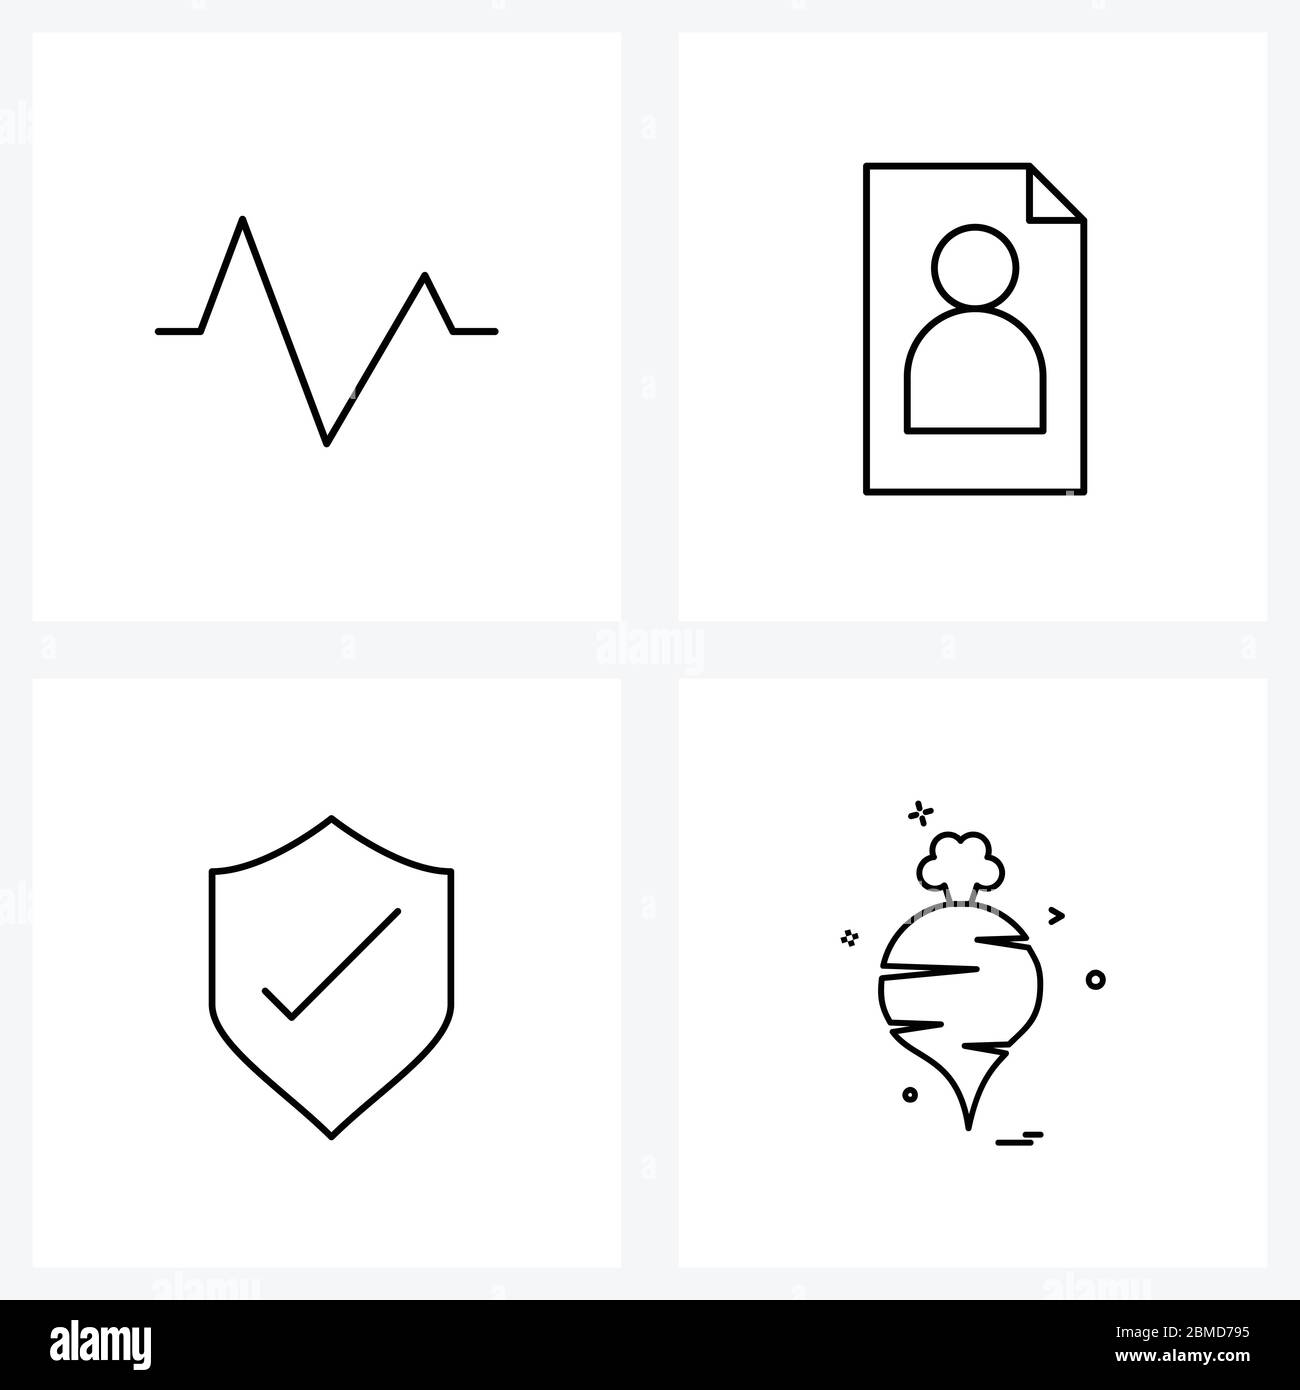 Stock Vector Icon Set of 4 Line Symbols for beat, safety, cv